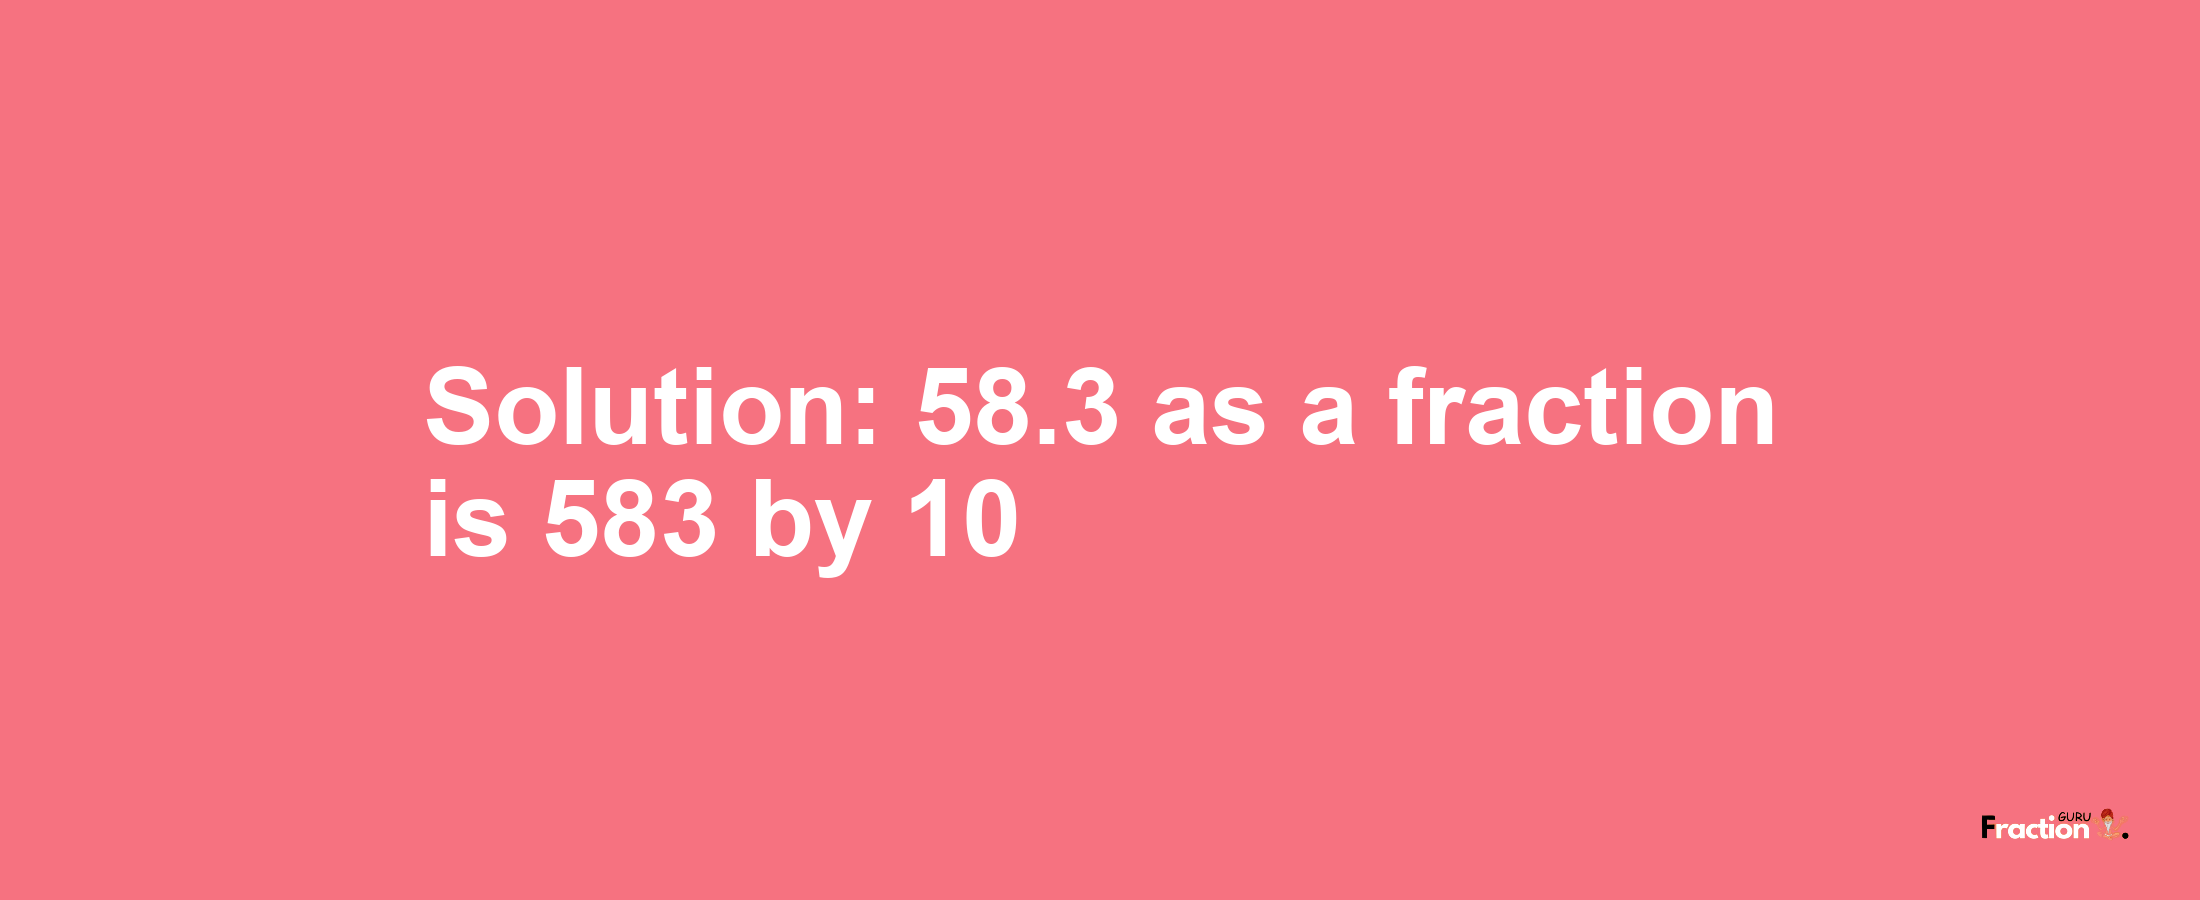 Solution:58.3 as a fraction is 583/10